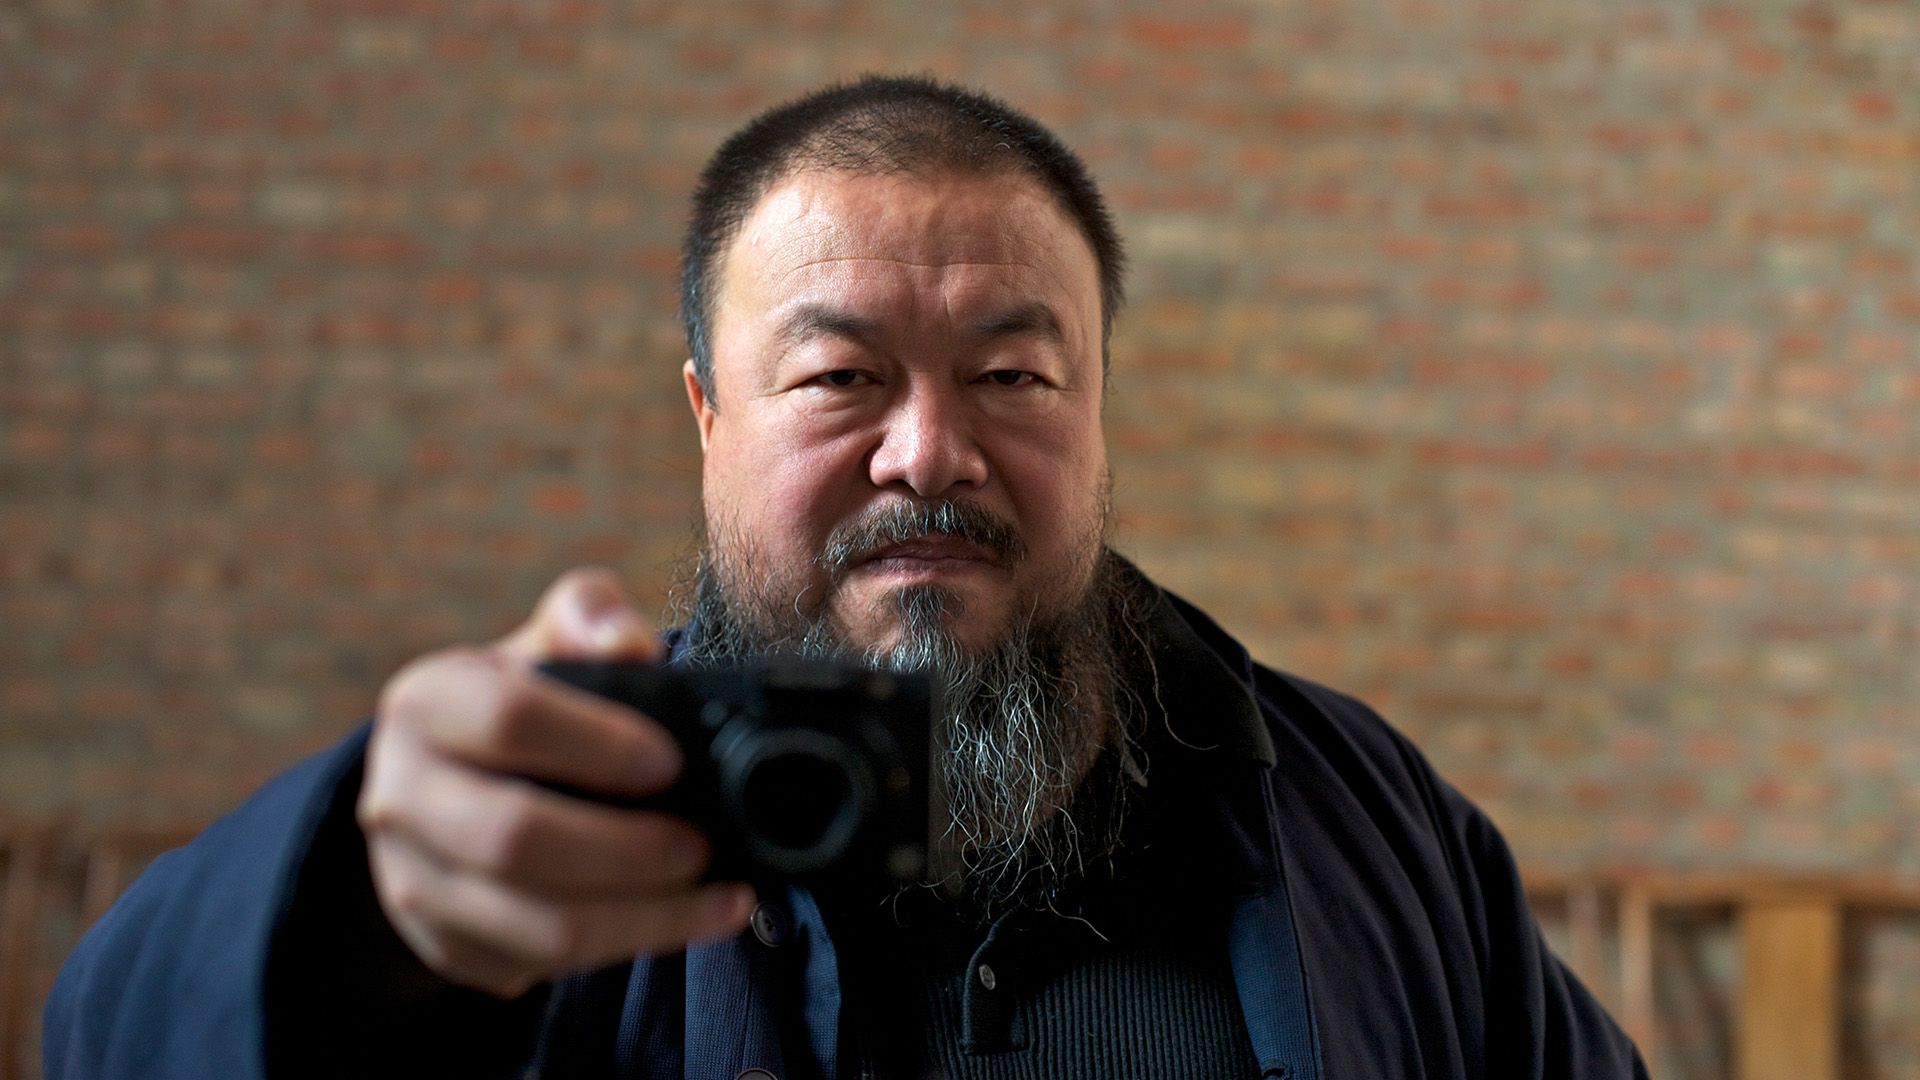 Ai Weiwei: Never Sorry background